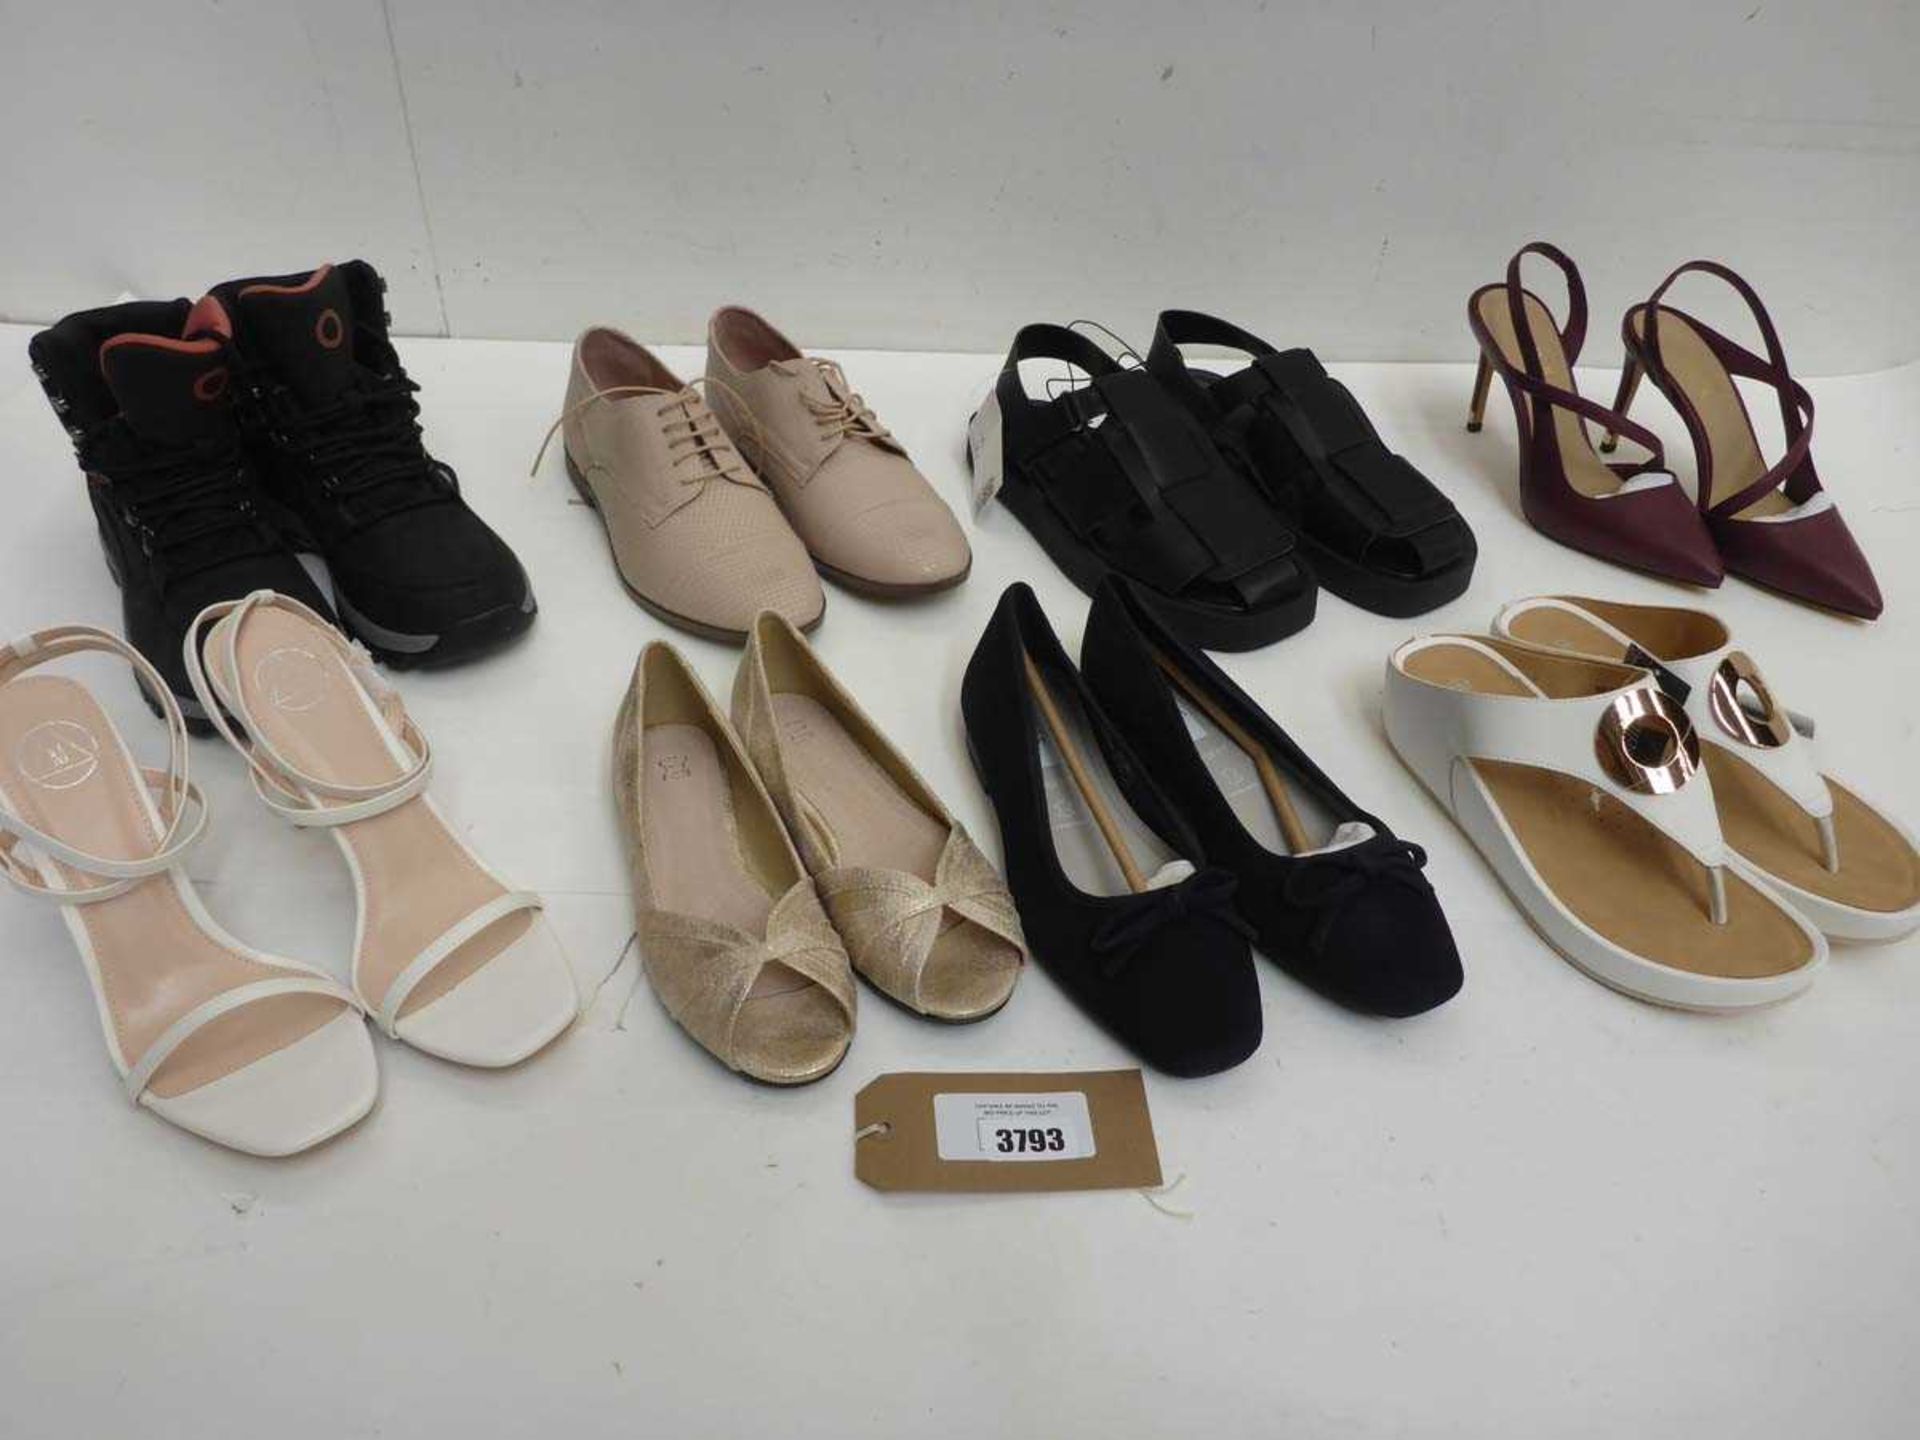 +VAT 7 pairs of ladies trainers, sandals & shoes including M&S, H&M, New Look etc in various sizes